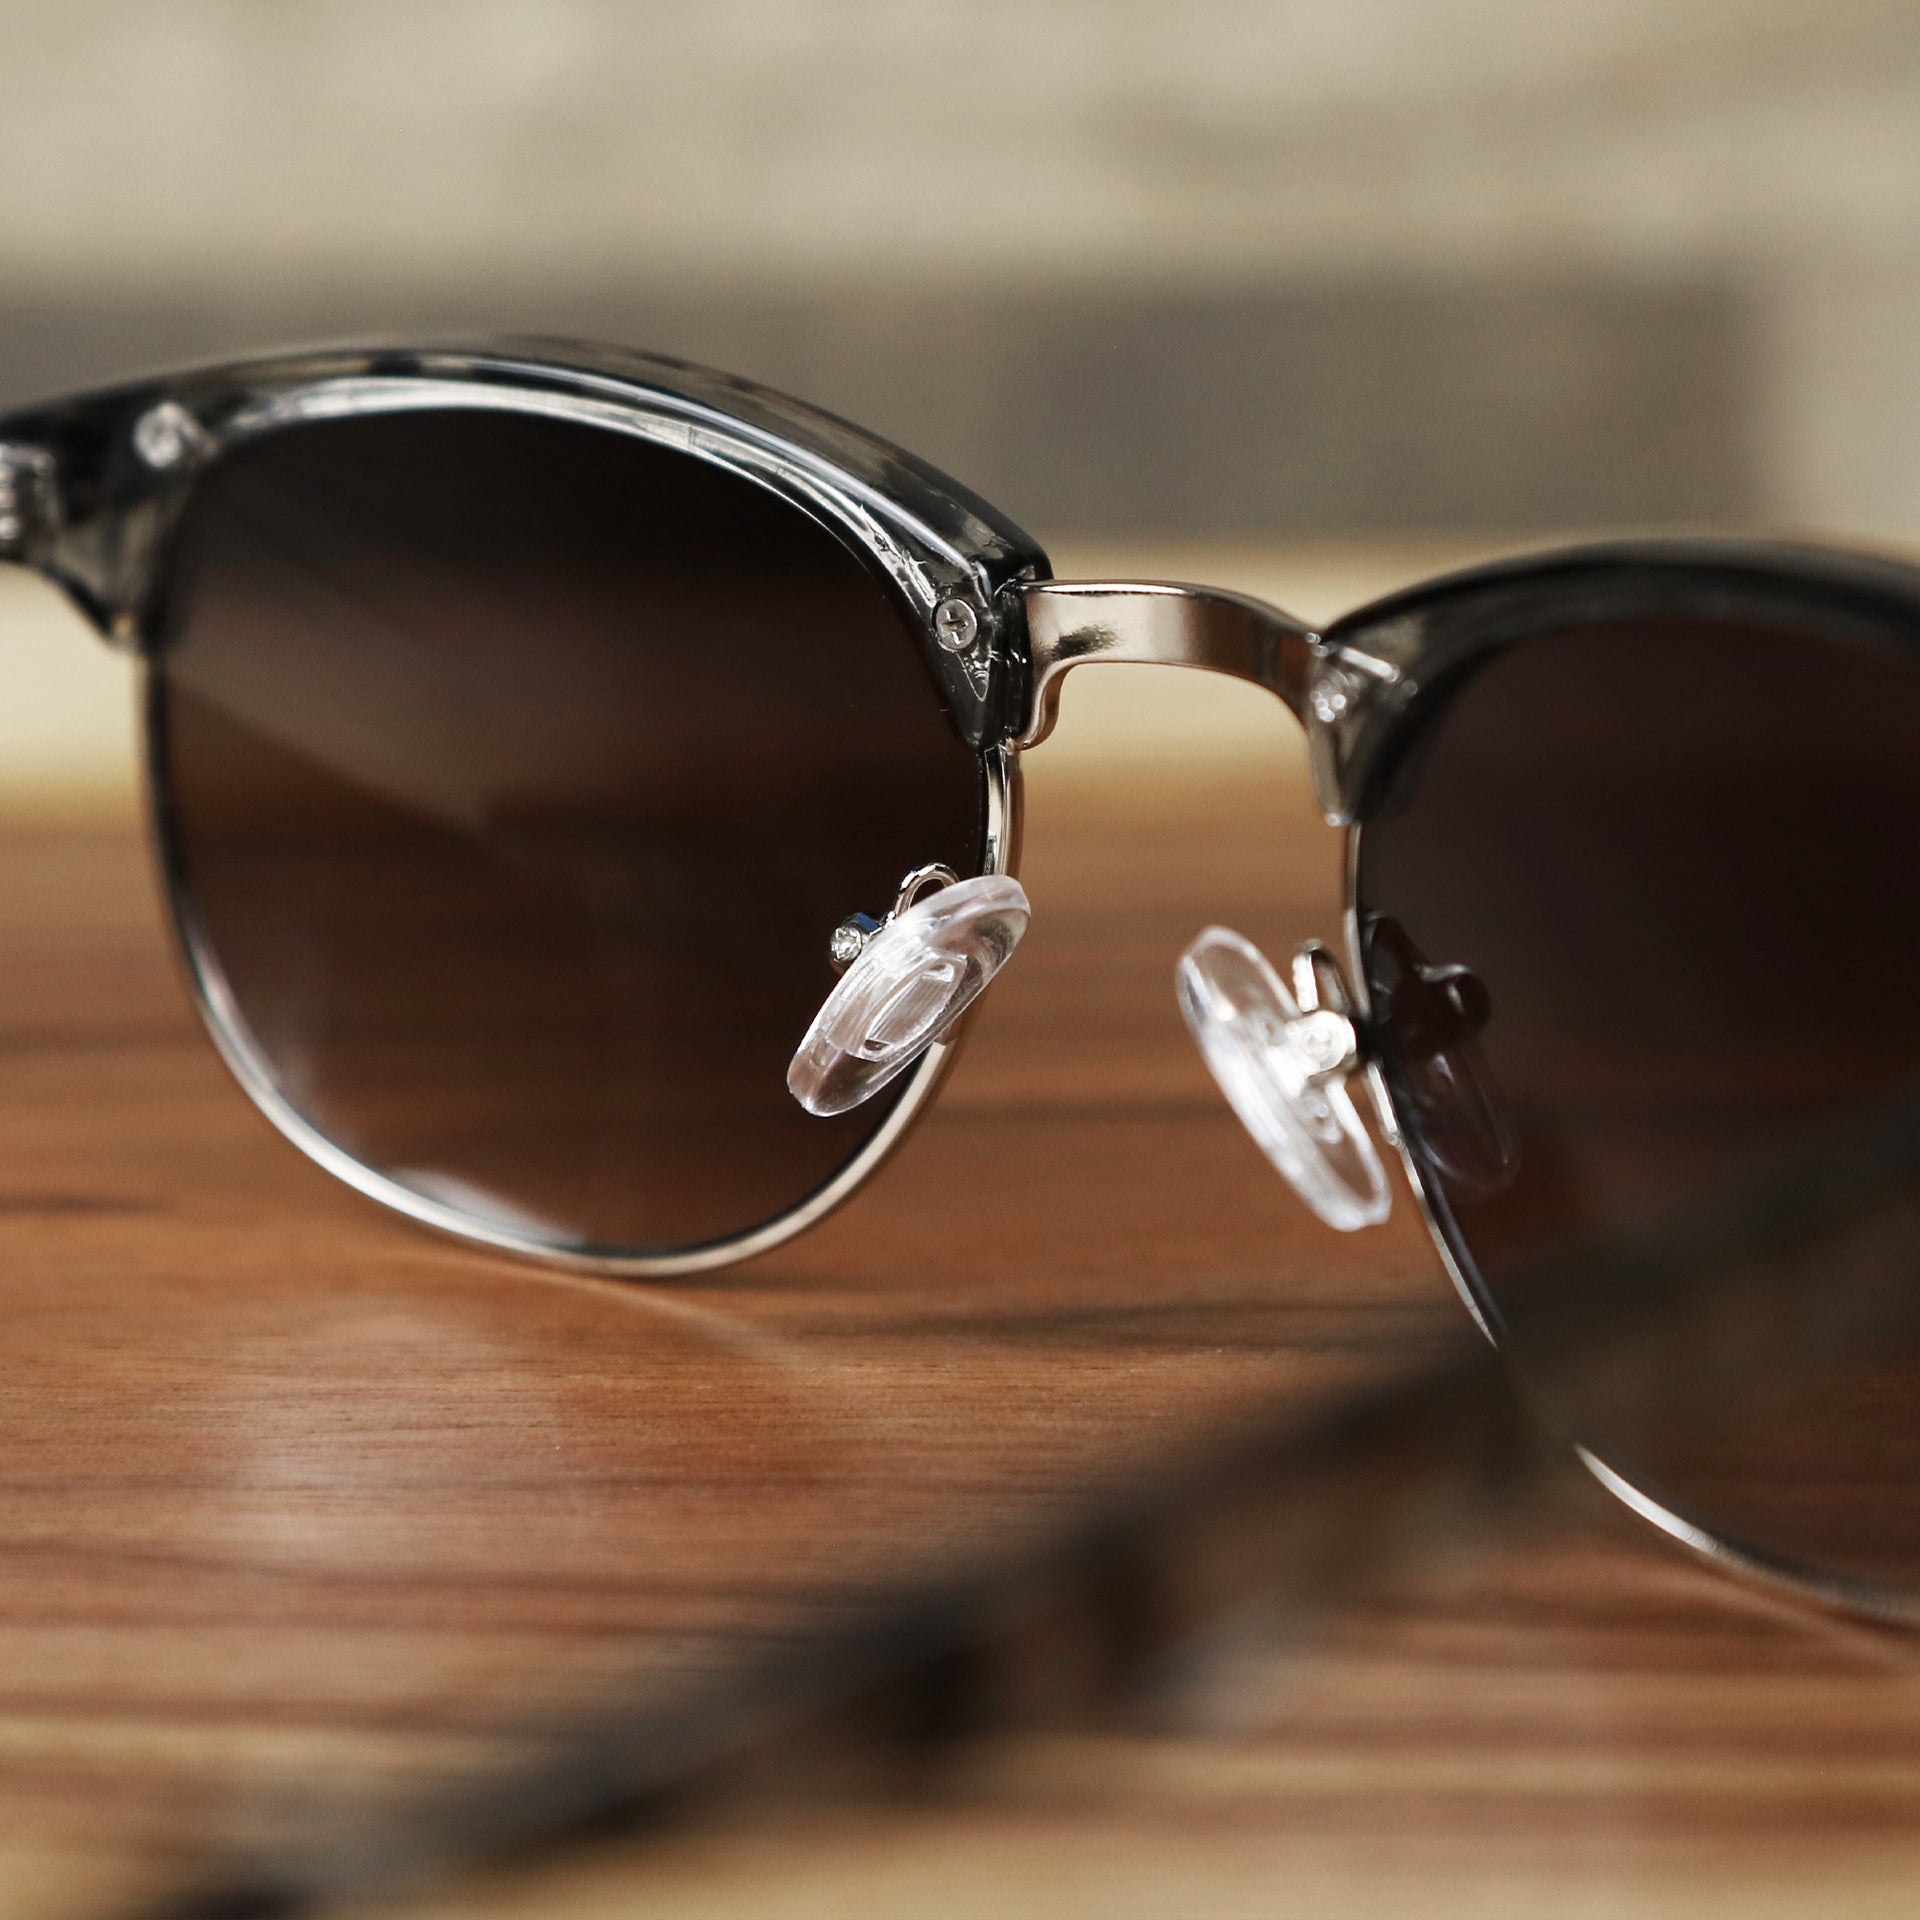 The inside of the Round Frame Black Gradient Lens Sunglasses with Black Tortoise Silver Frame